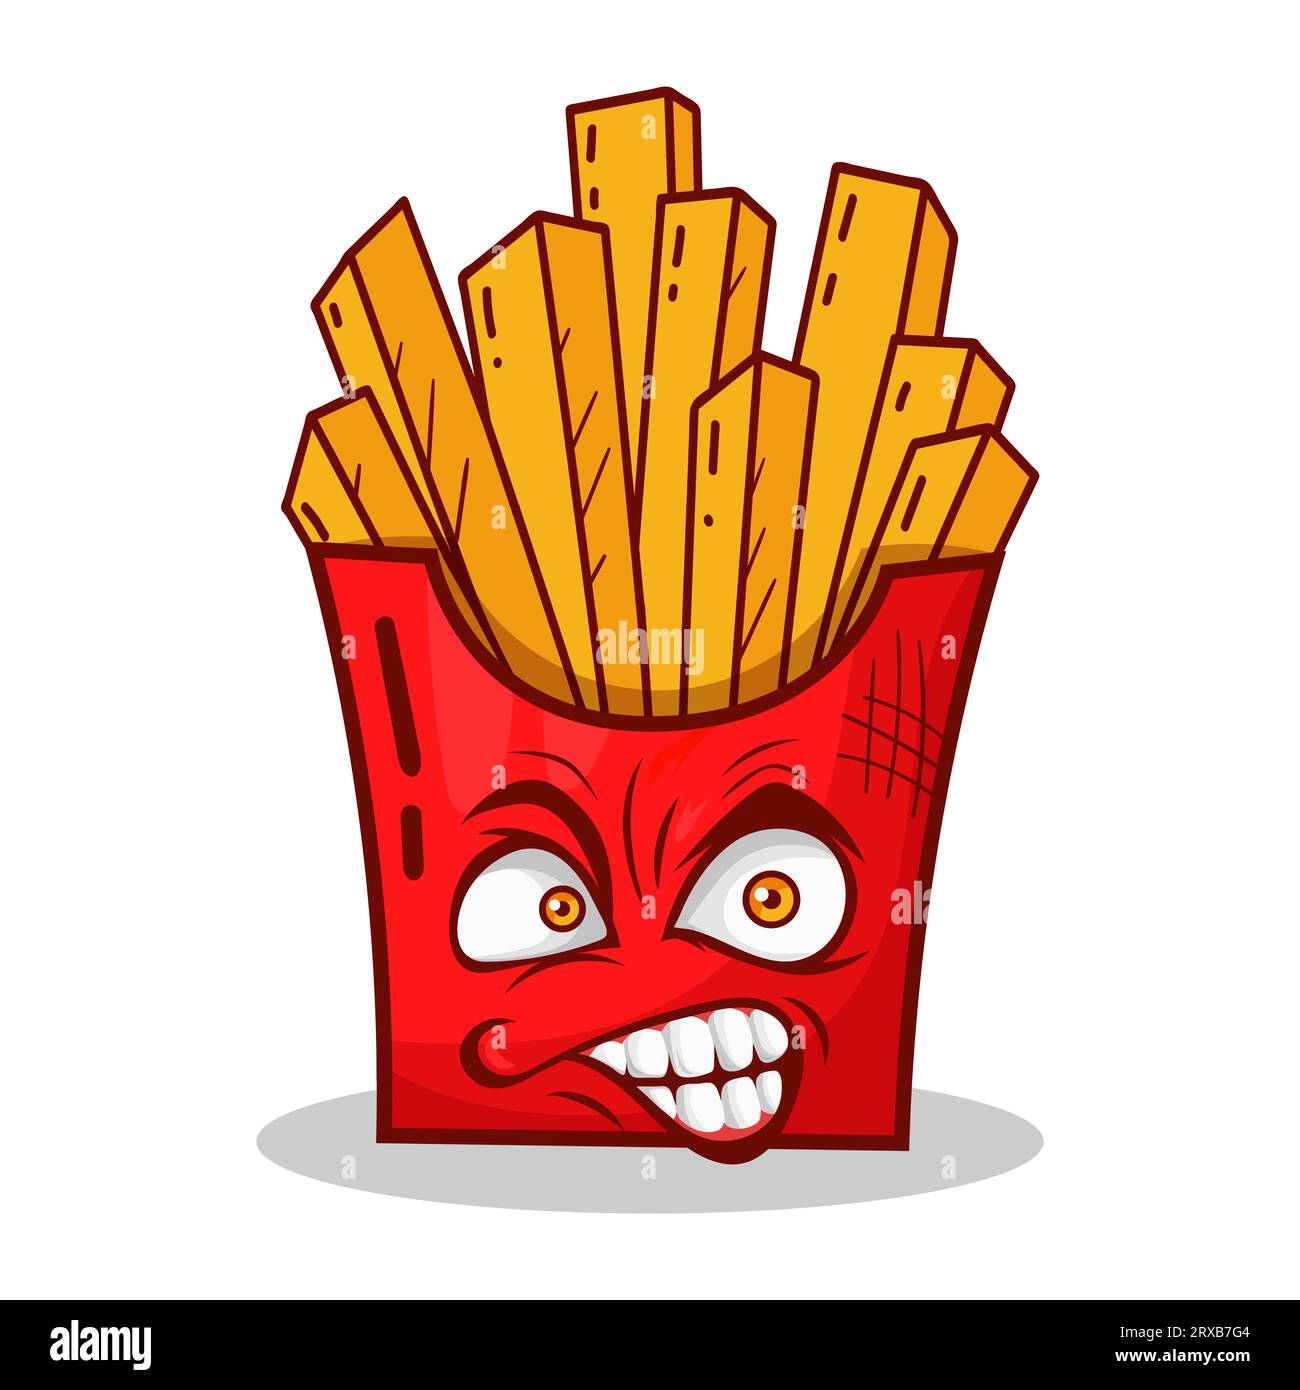 Angry Face French Fry Mascot Illustration. Angry Food Mascot Stock Photo